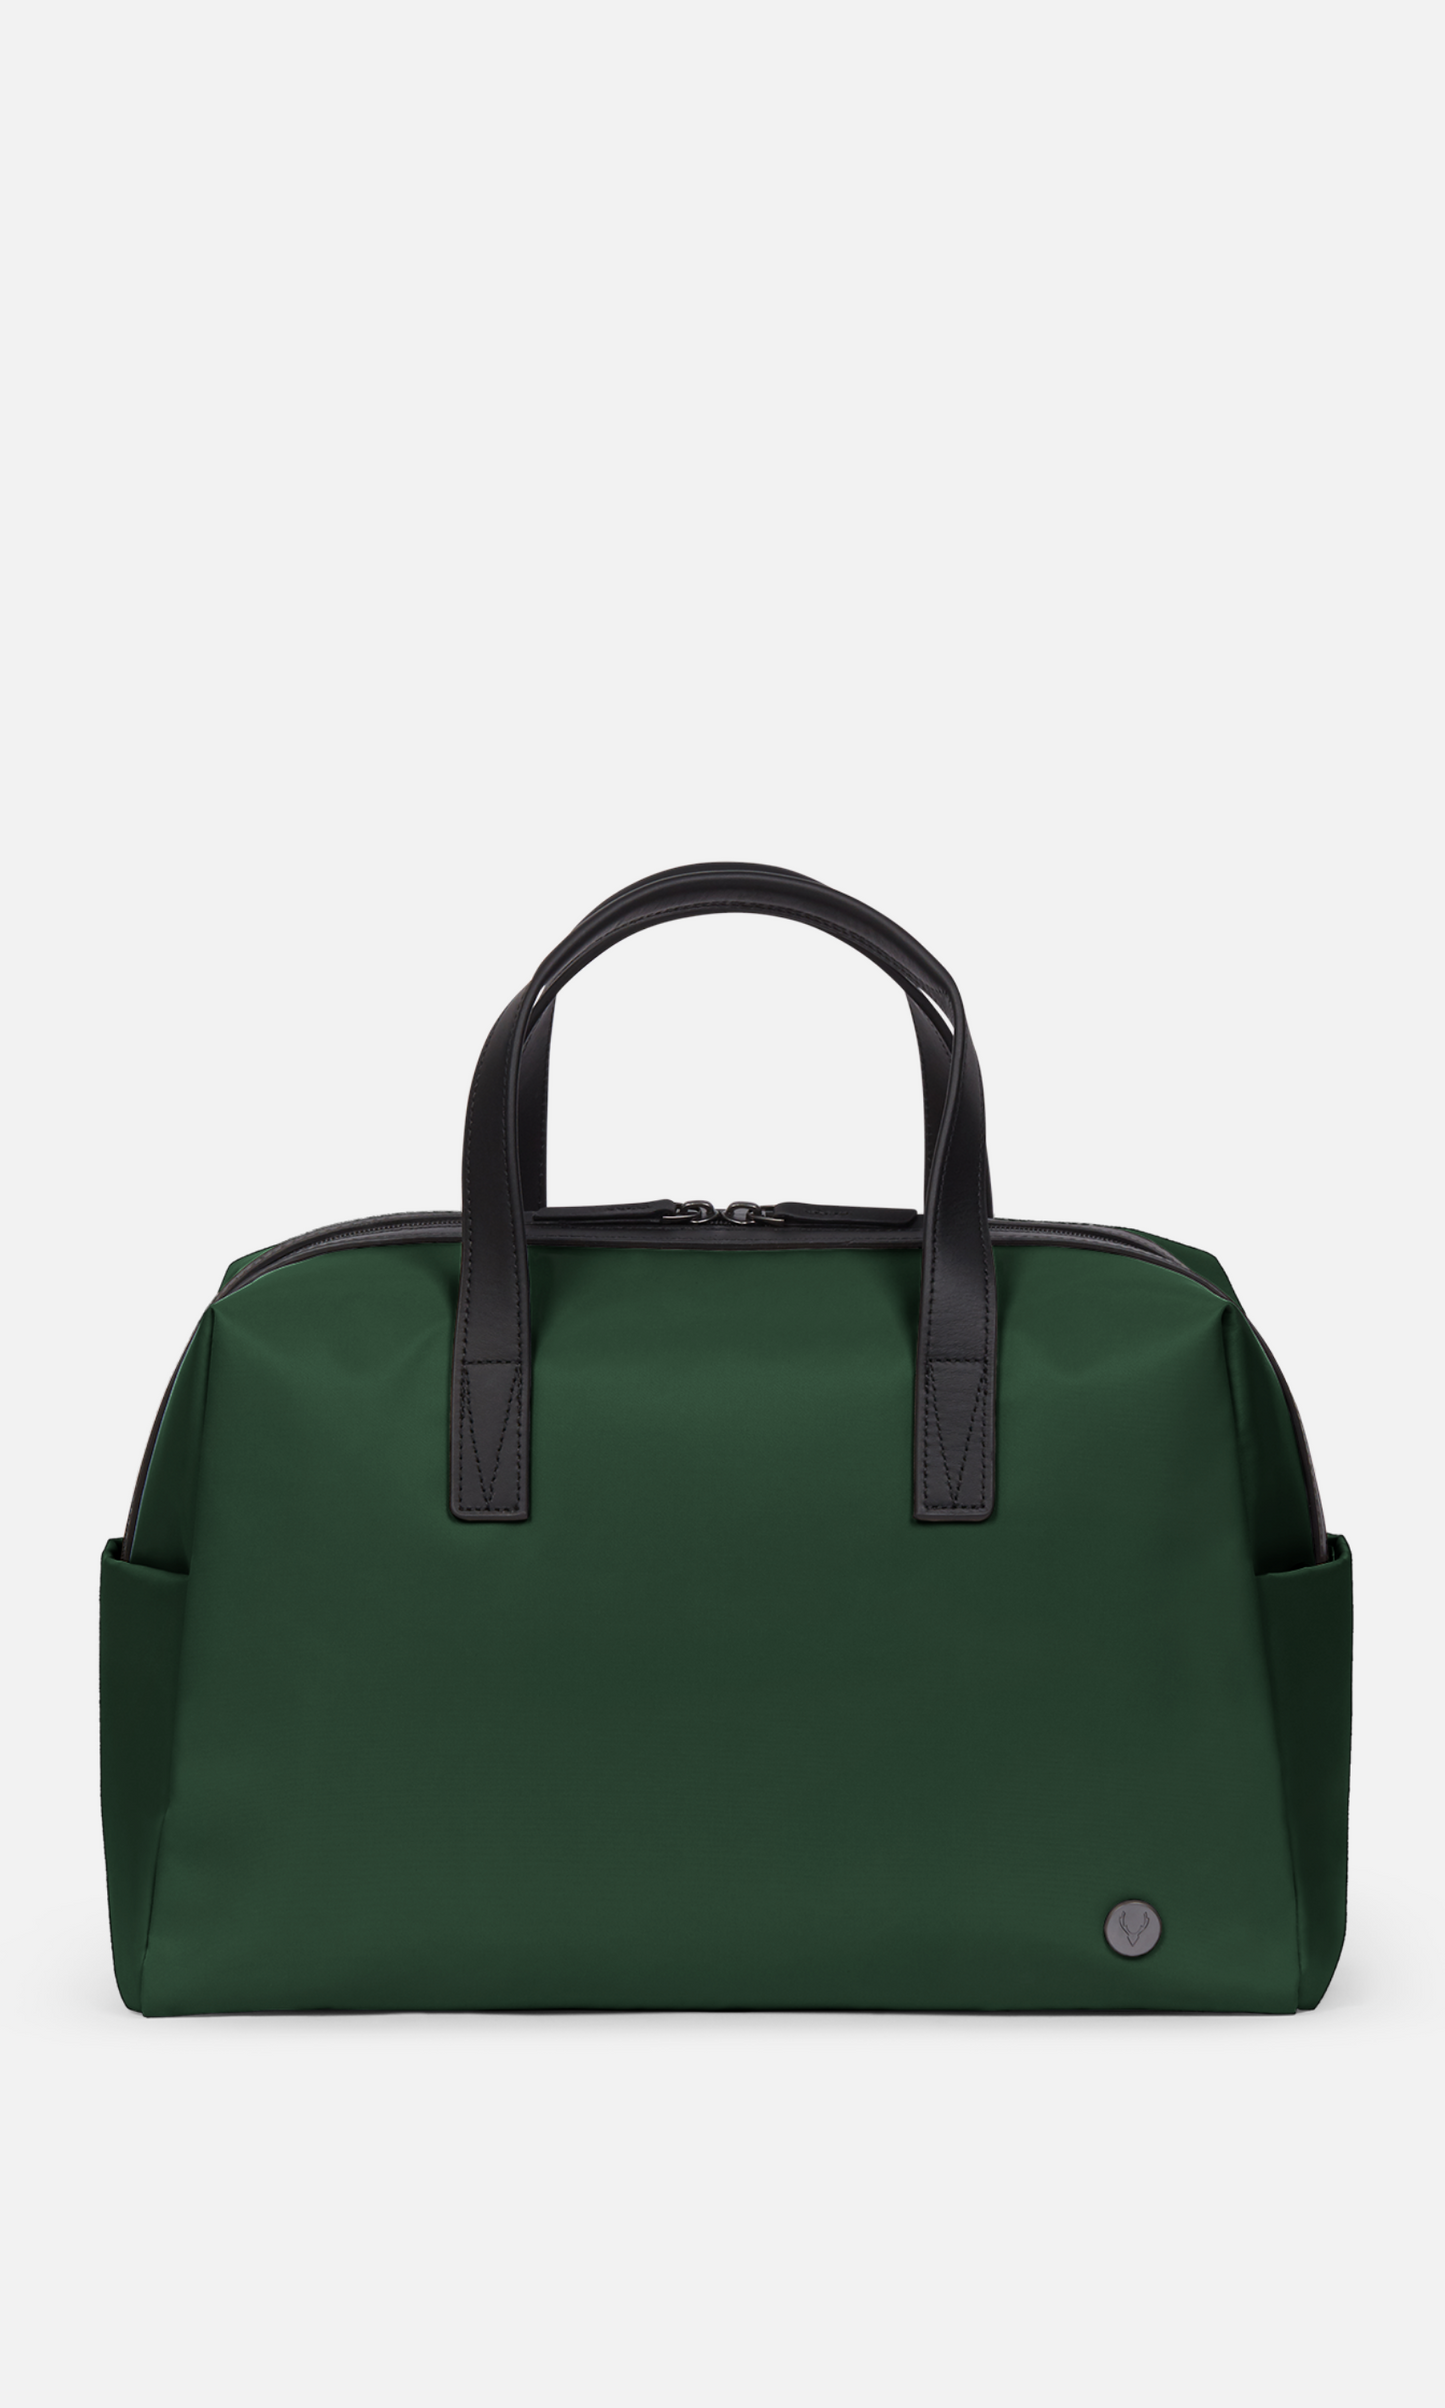 Chelsea Overnight Bag in Woodland Green